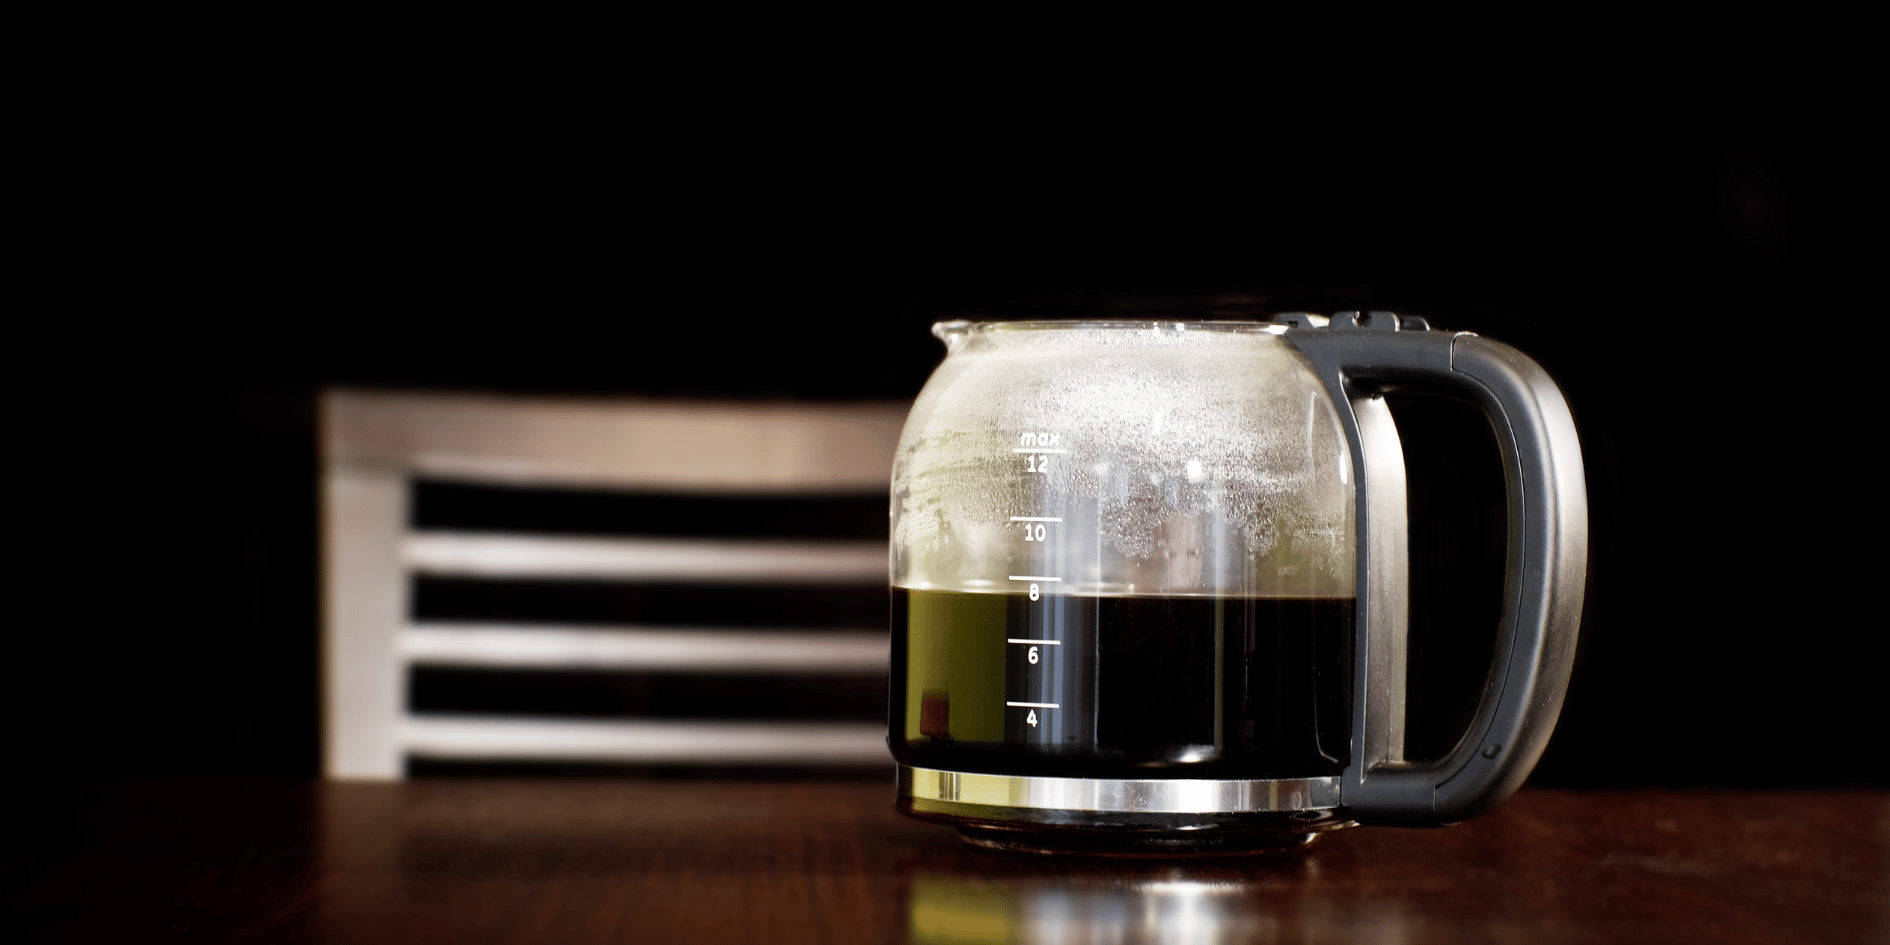 We blend, roast, and grind for drip coffee with peak flavor